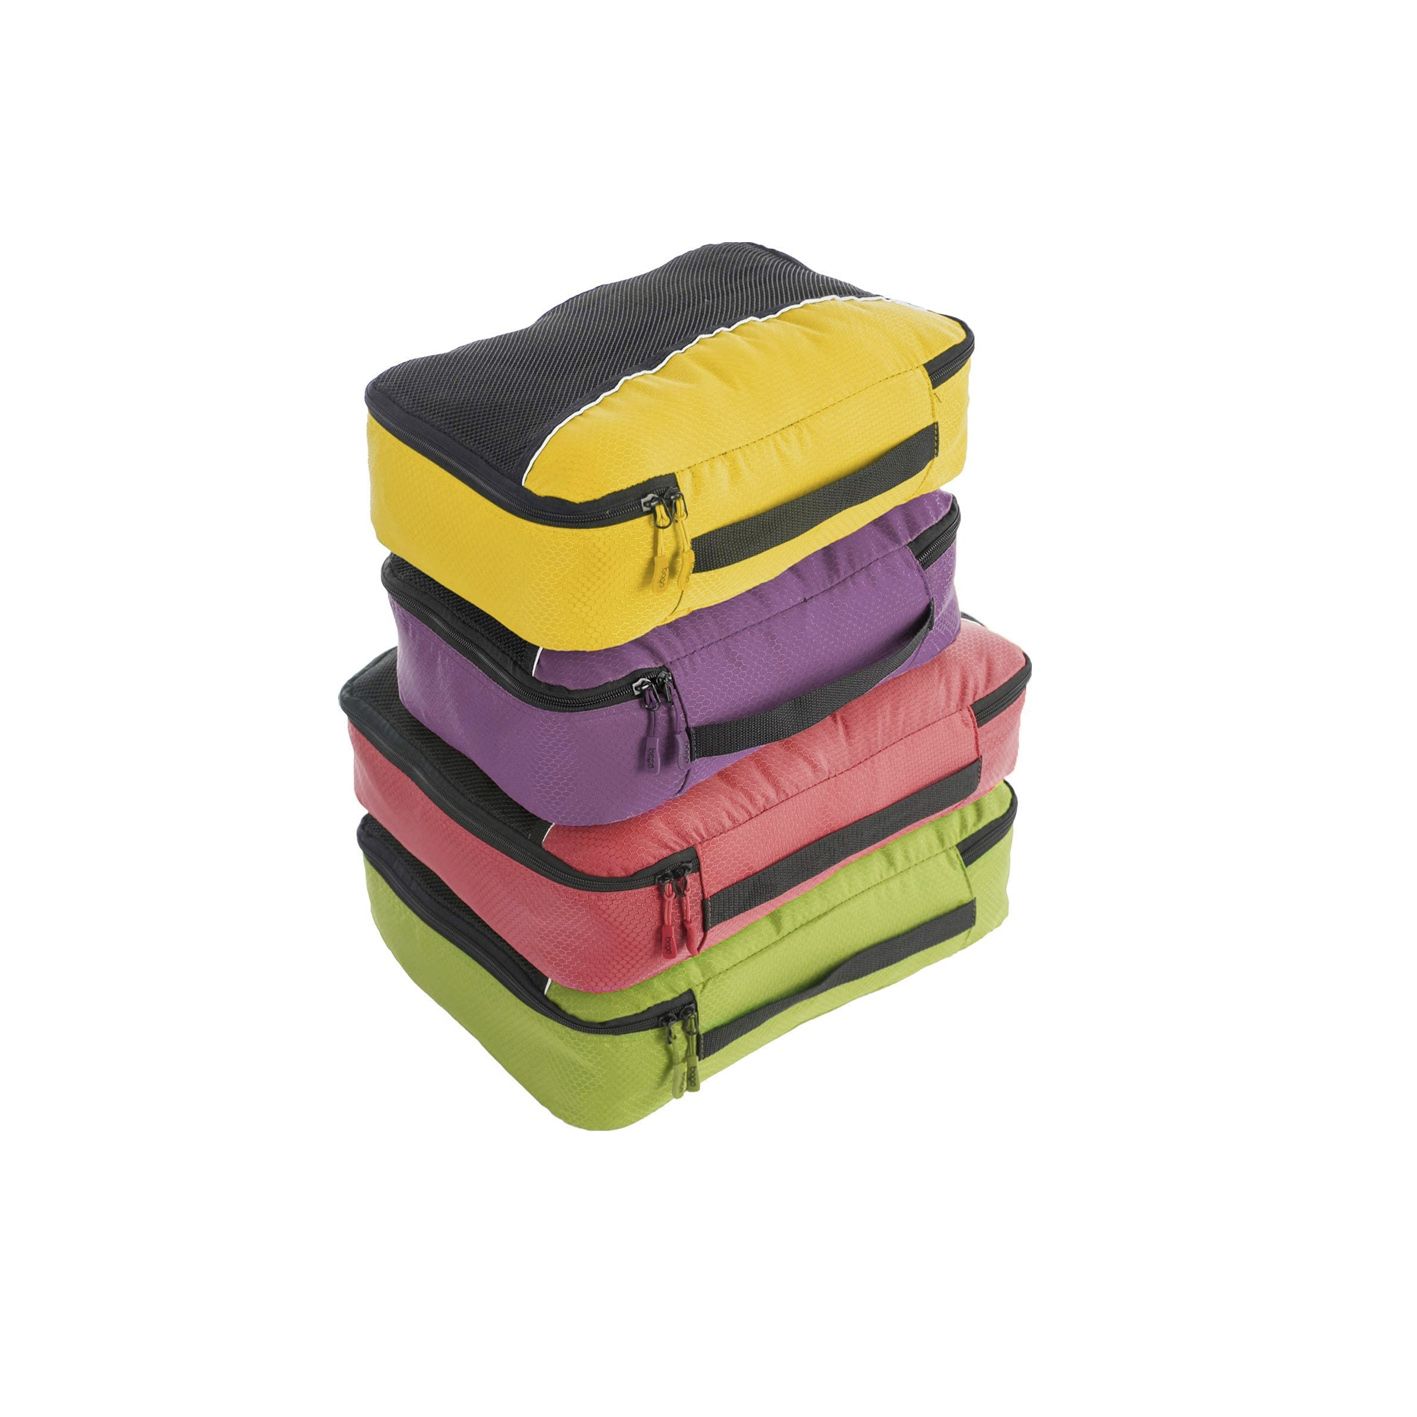  Aerotrunk Compression Packing Cubes for Suitcases